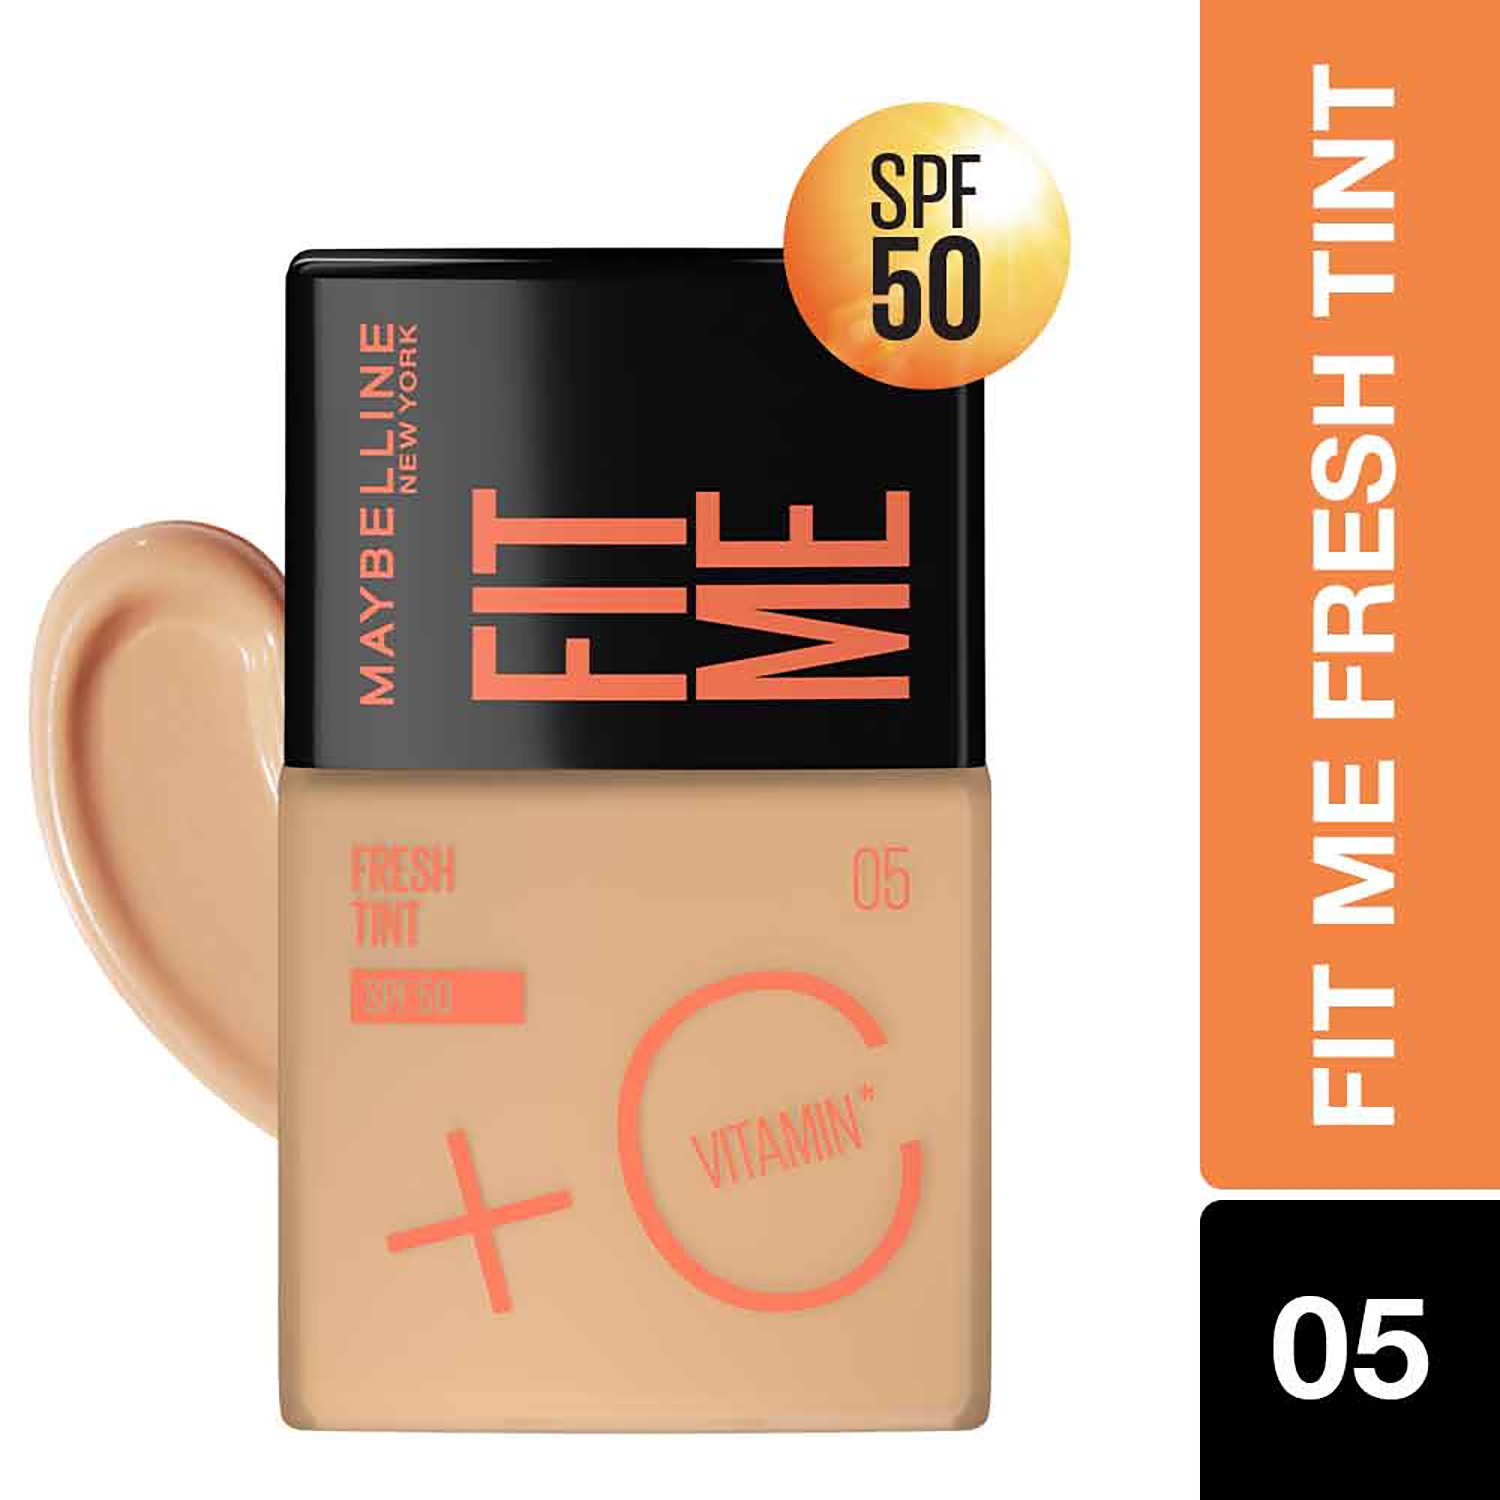 Maybelline New York | Maybelline New York Fit Me Fresh Tint With SPF 50 & Vitamin C - 05 Shade (30ml)